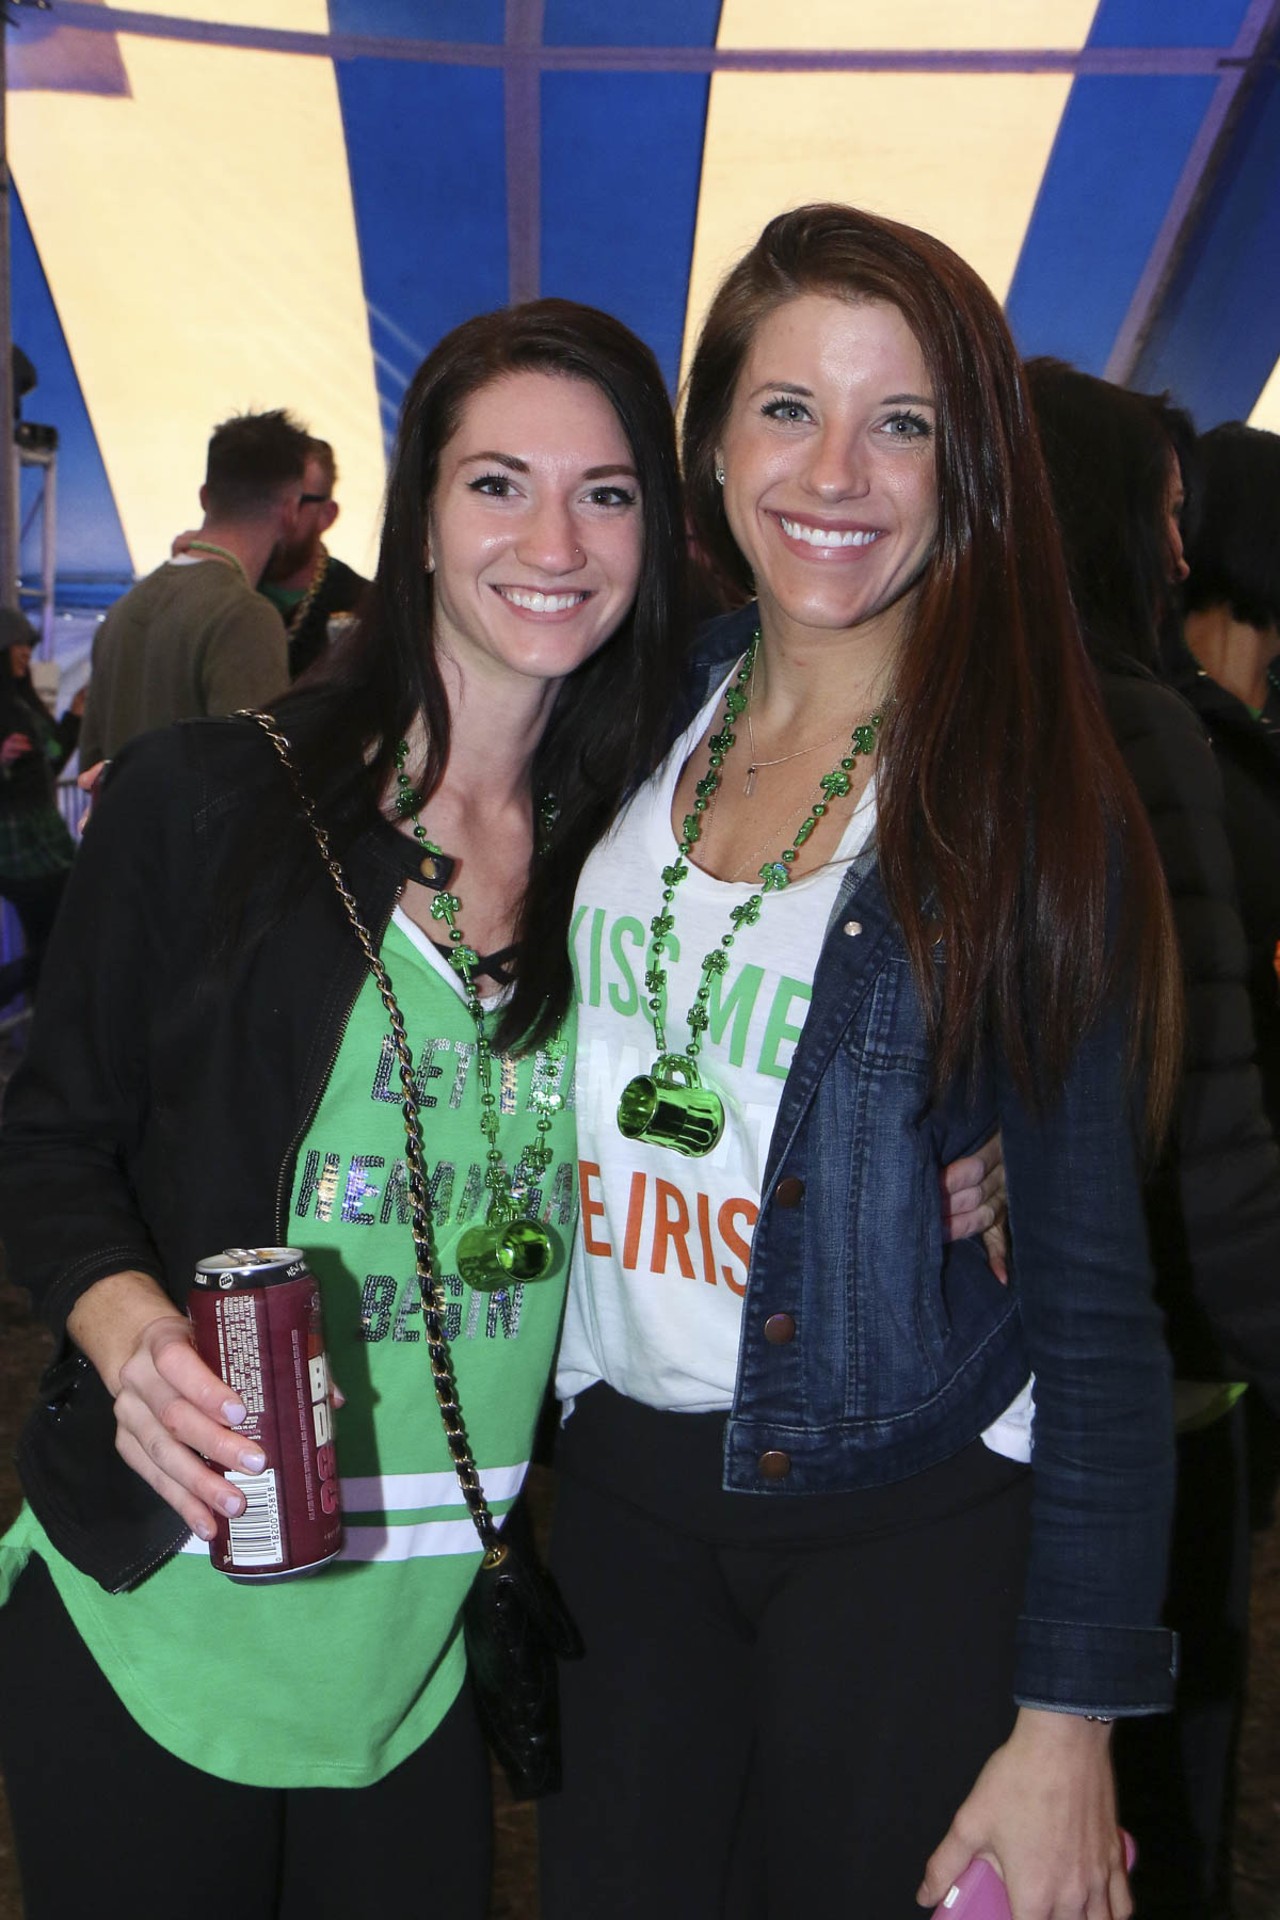 58 photos from Corktown Paddy's Parade Party